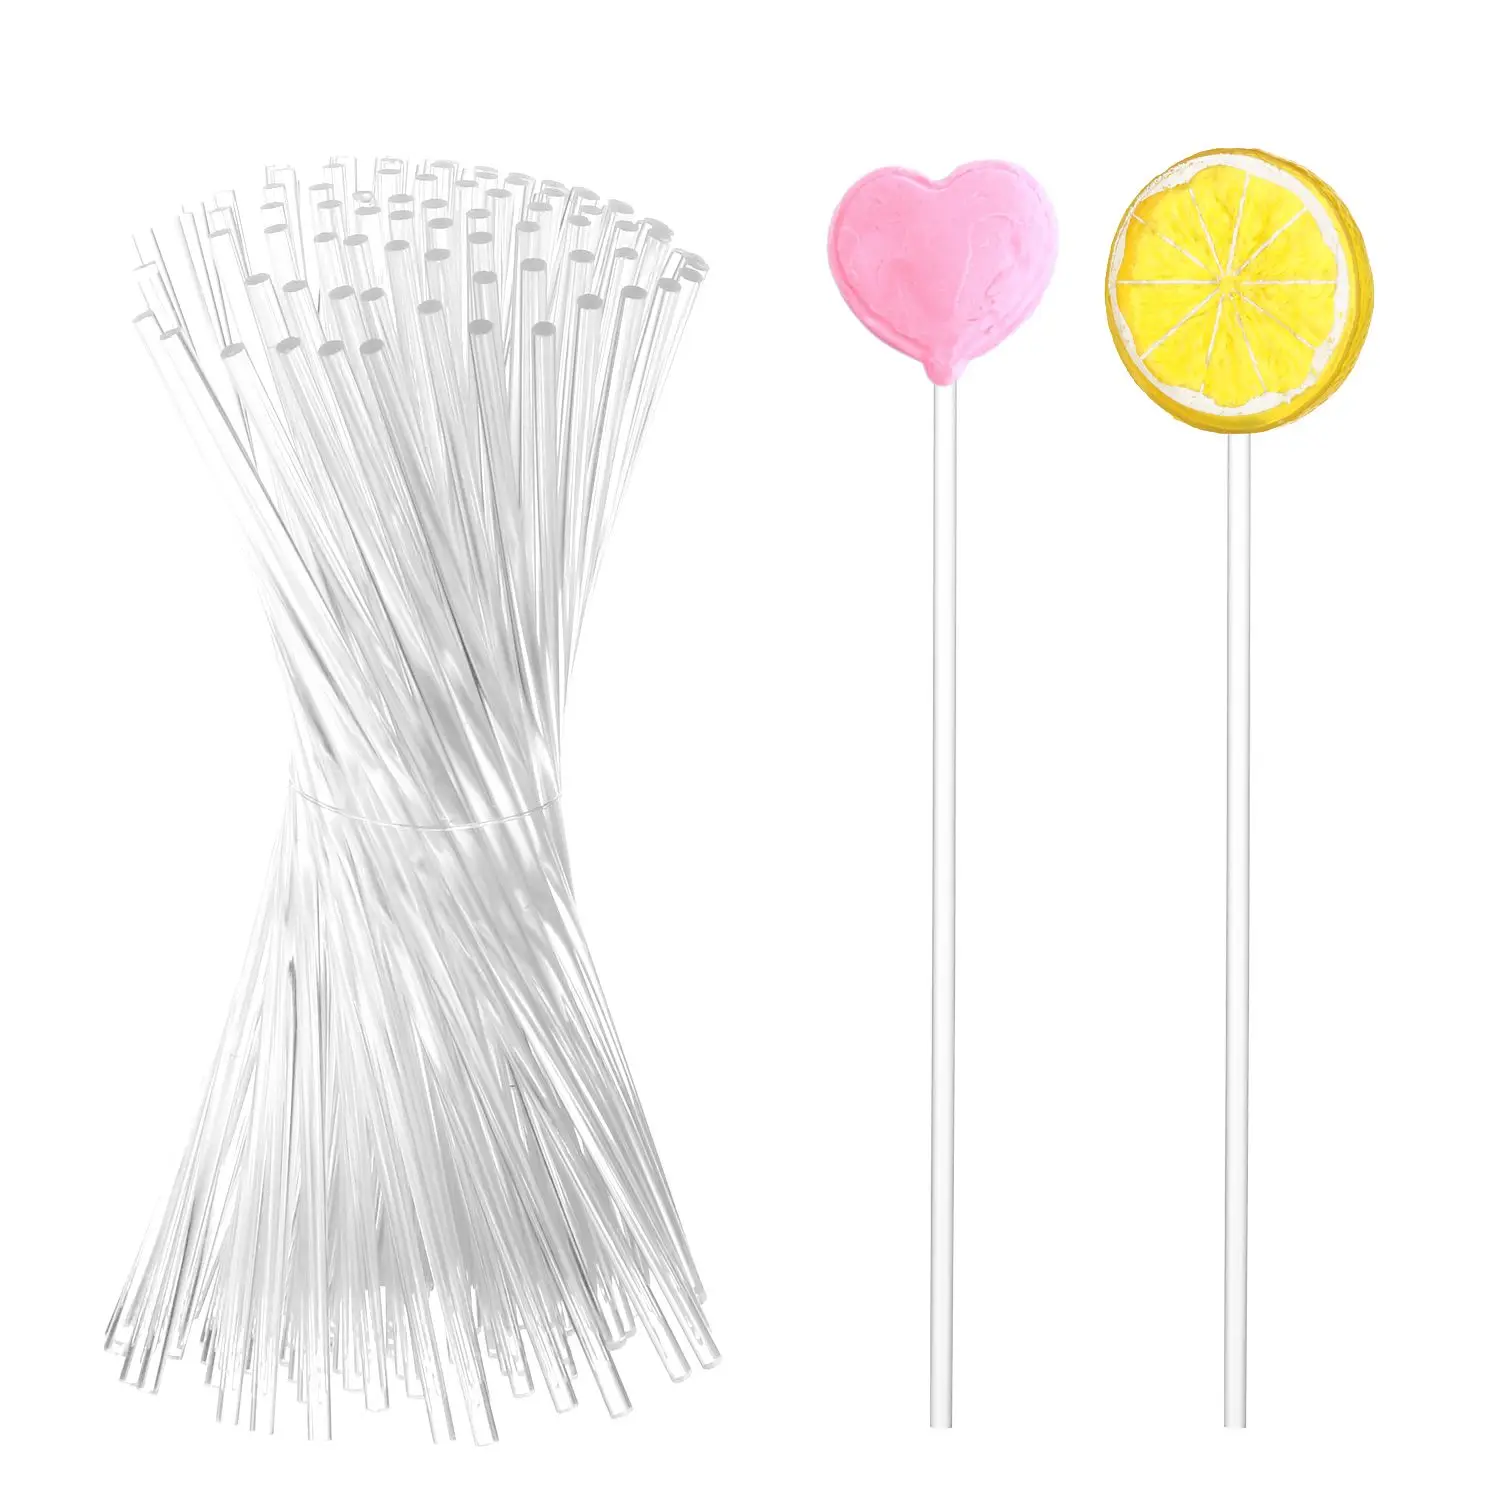 

100Pcs 6 Inch Acrylic Lollipop Sticks Clear Reusable Candy Cake Pops Stick for DIY Making Cupcake Toppers Dessert Chocolate